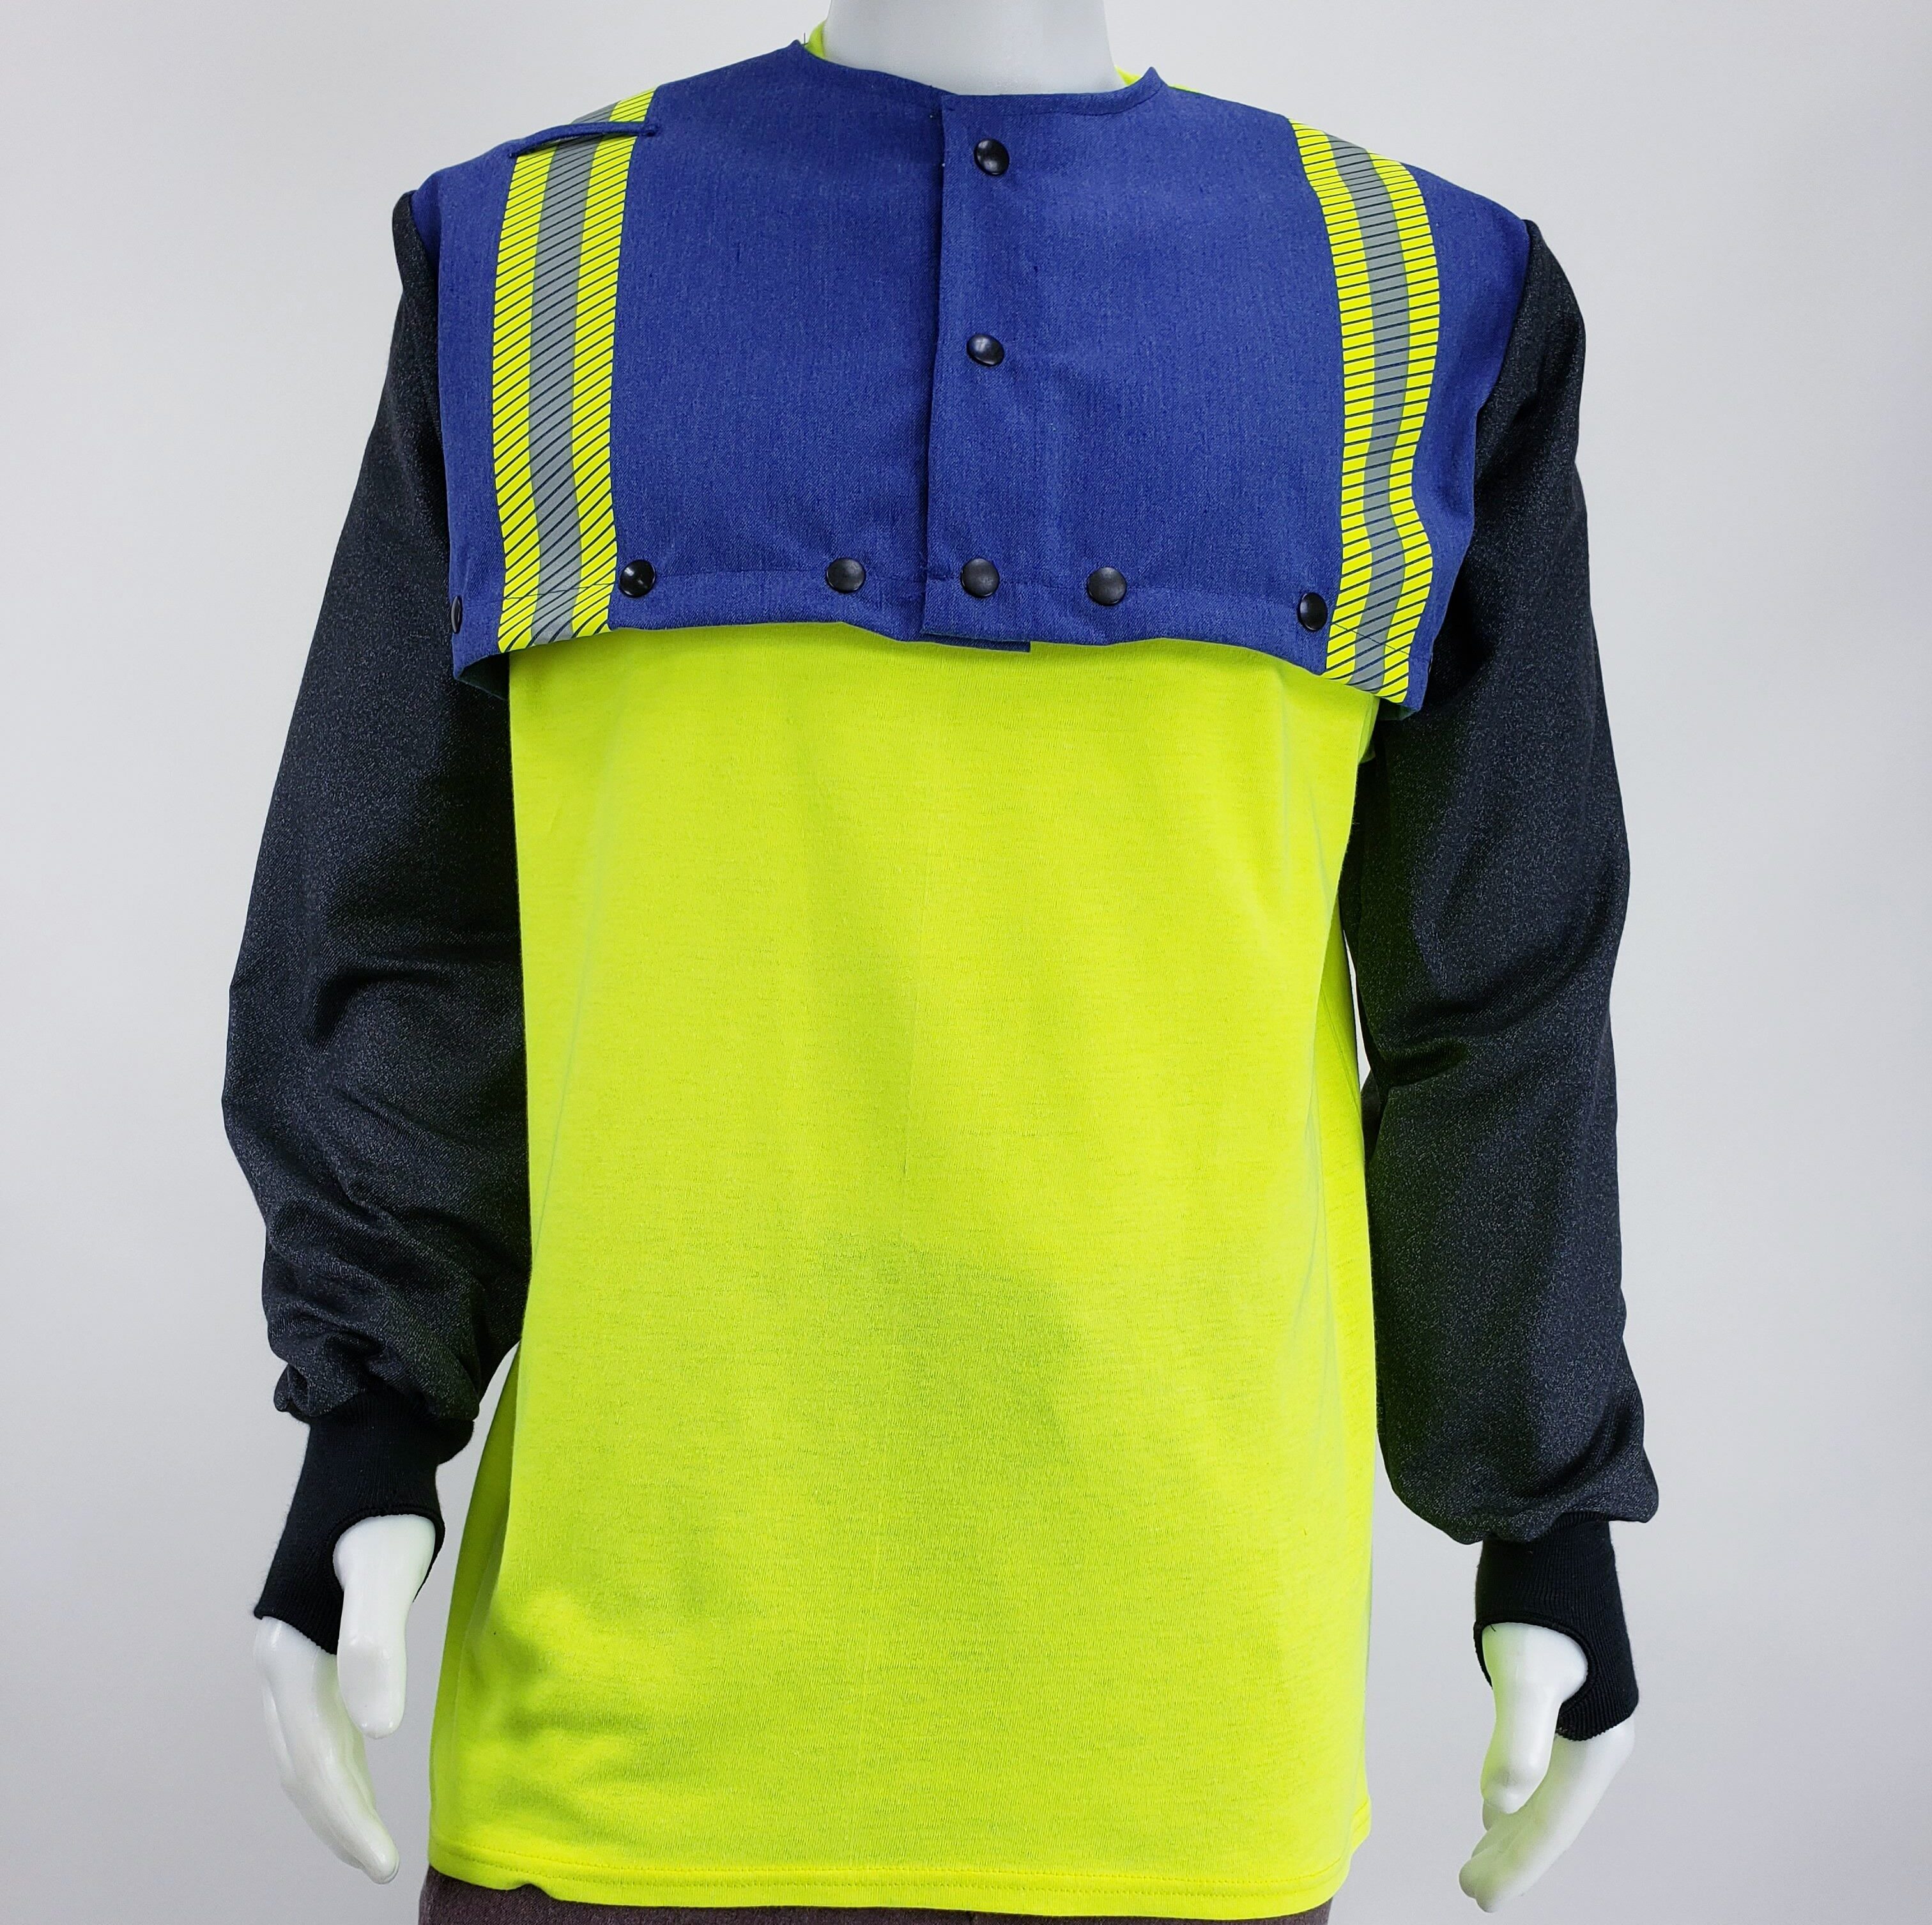 Stamping & Pressing Safety Apparel in Indiana